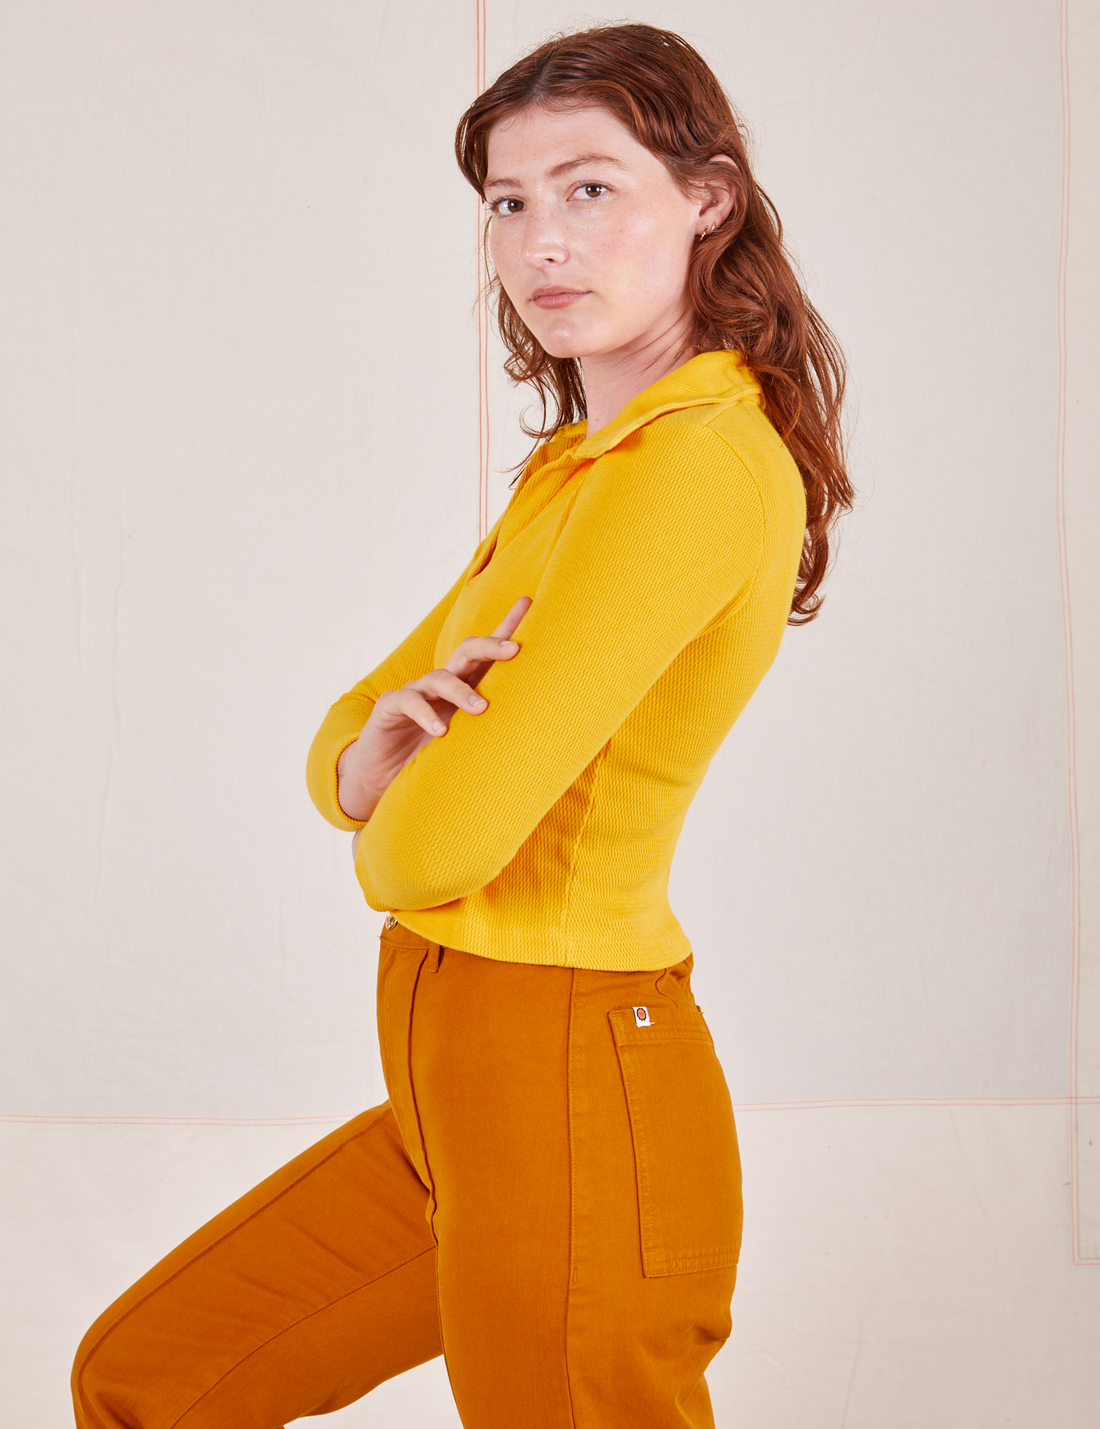 Long Sleeve Fisherman Polo in Sunshine Yellow side view on Alex wearing spicy mustard Western Pants